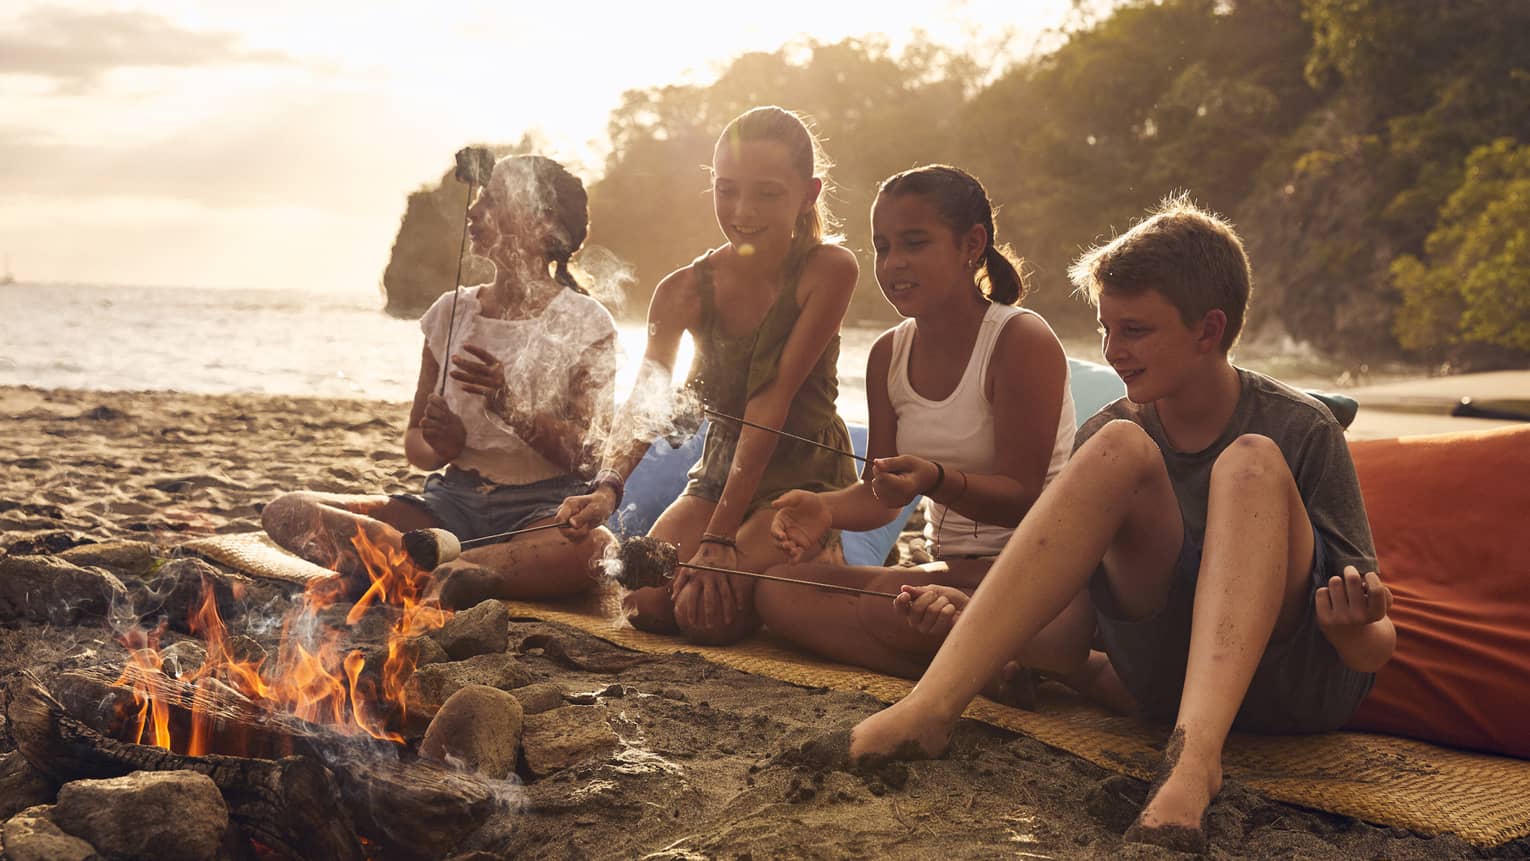 A group of young kids on a beach sitting near a small fire.